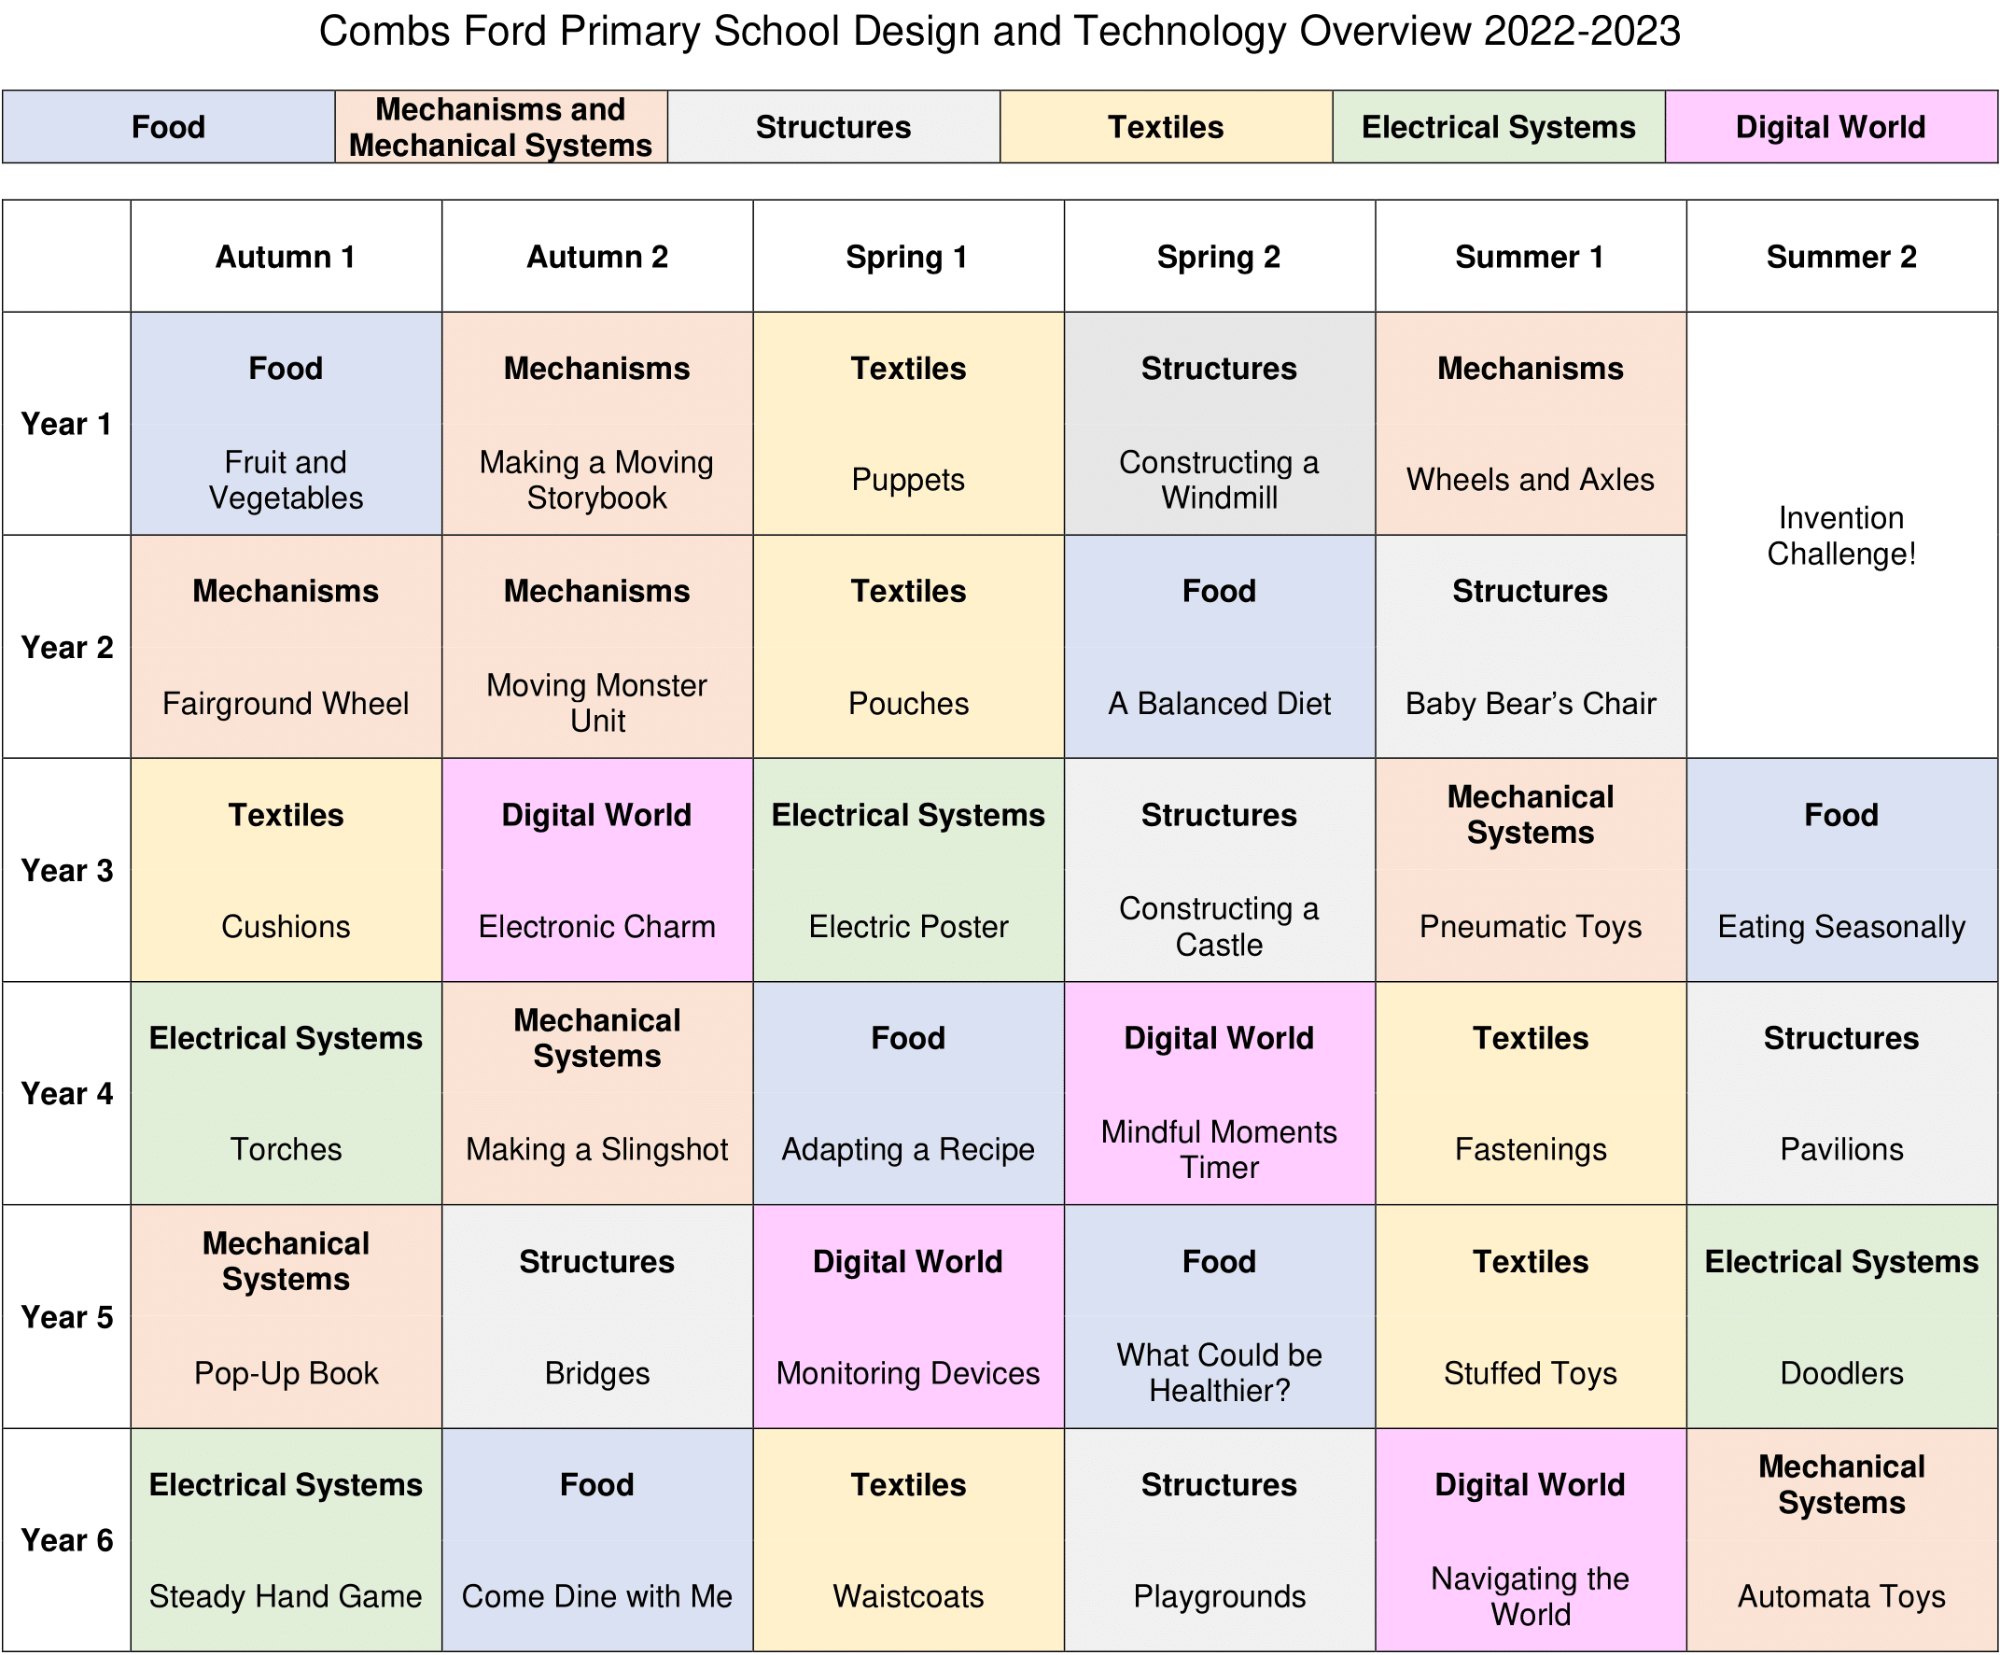 Image of Combs Ford Primary School's Design and Technology Overview (2022-2023).